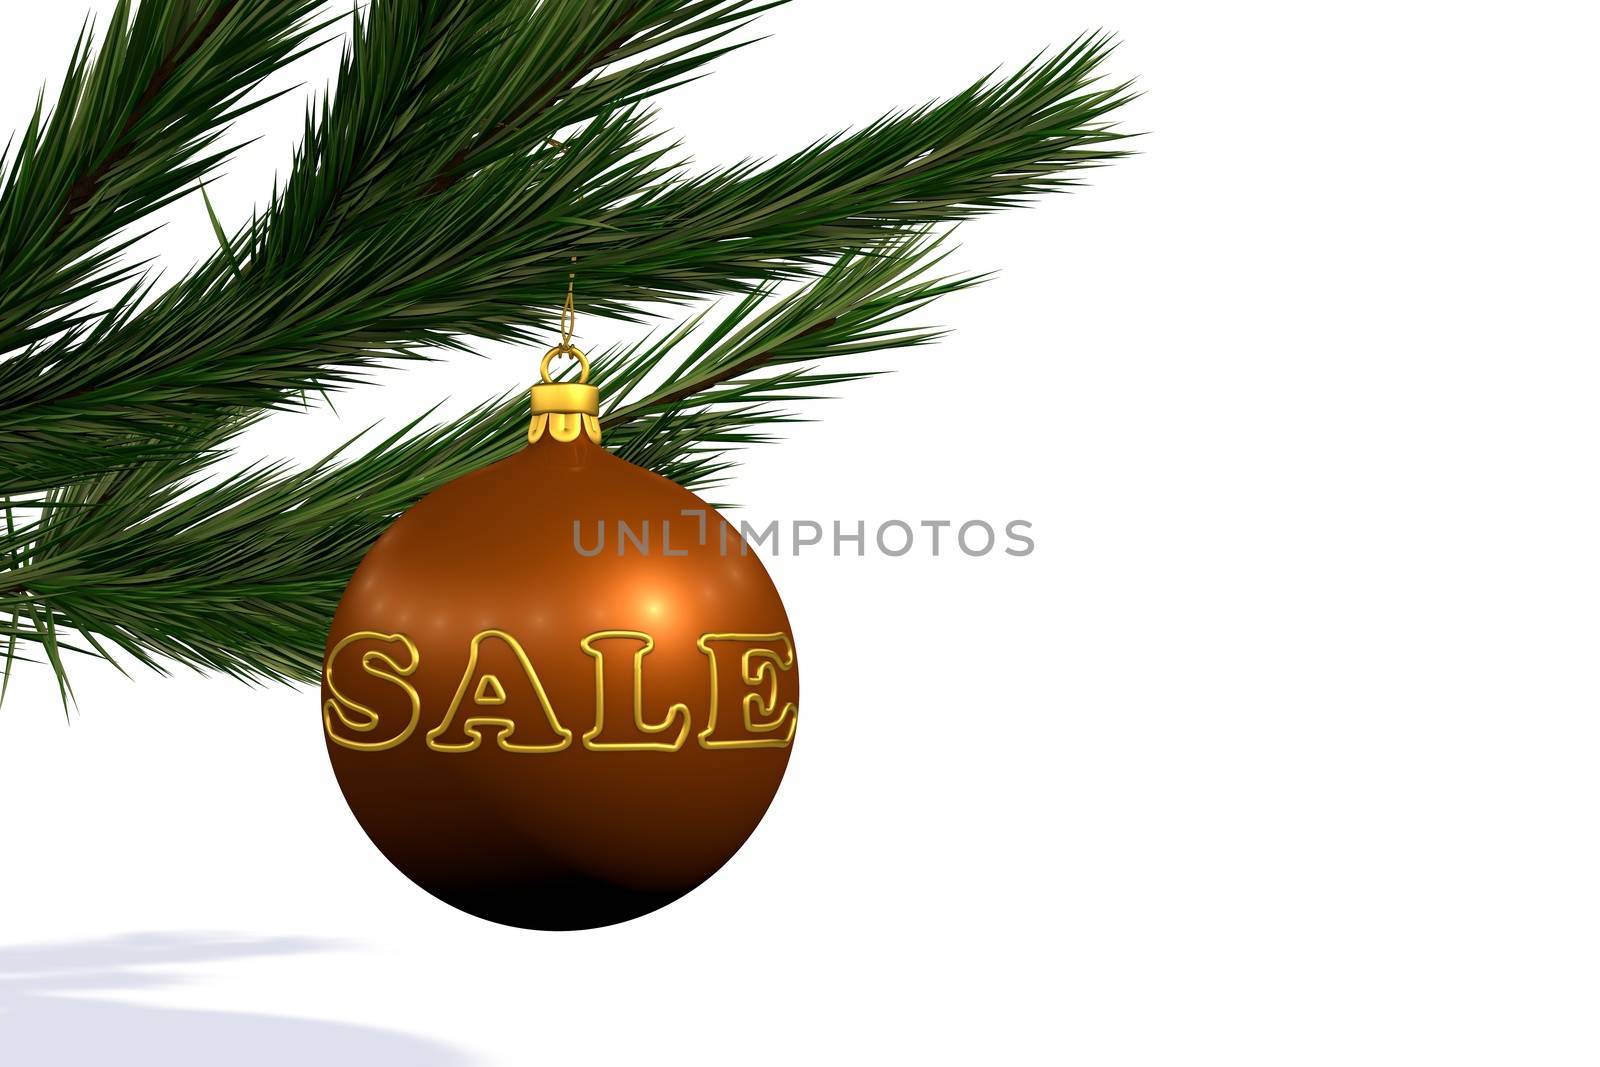 orange Christmas decoration ball sale on Christmas tree branch isolated on white